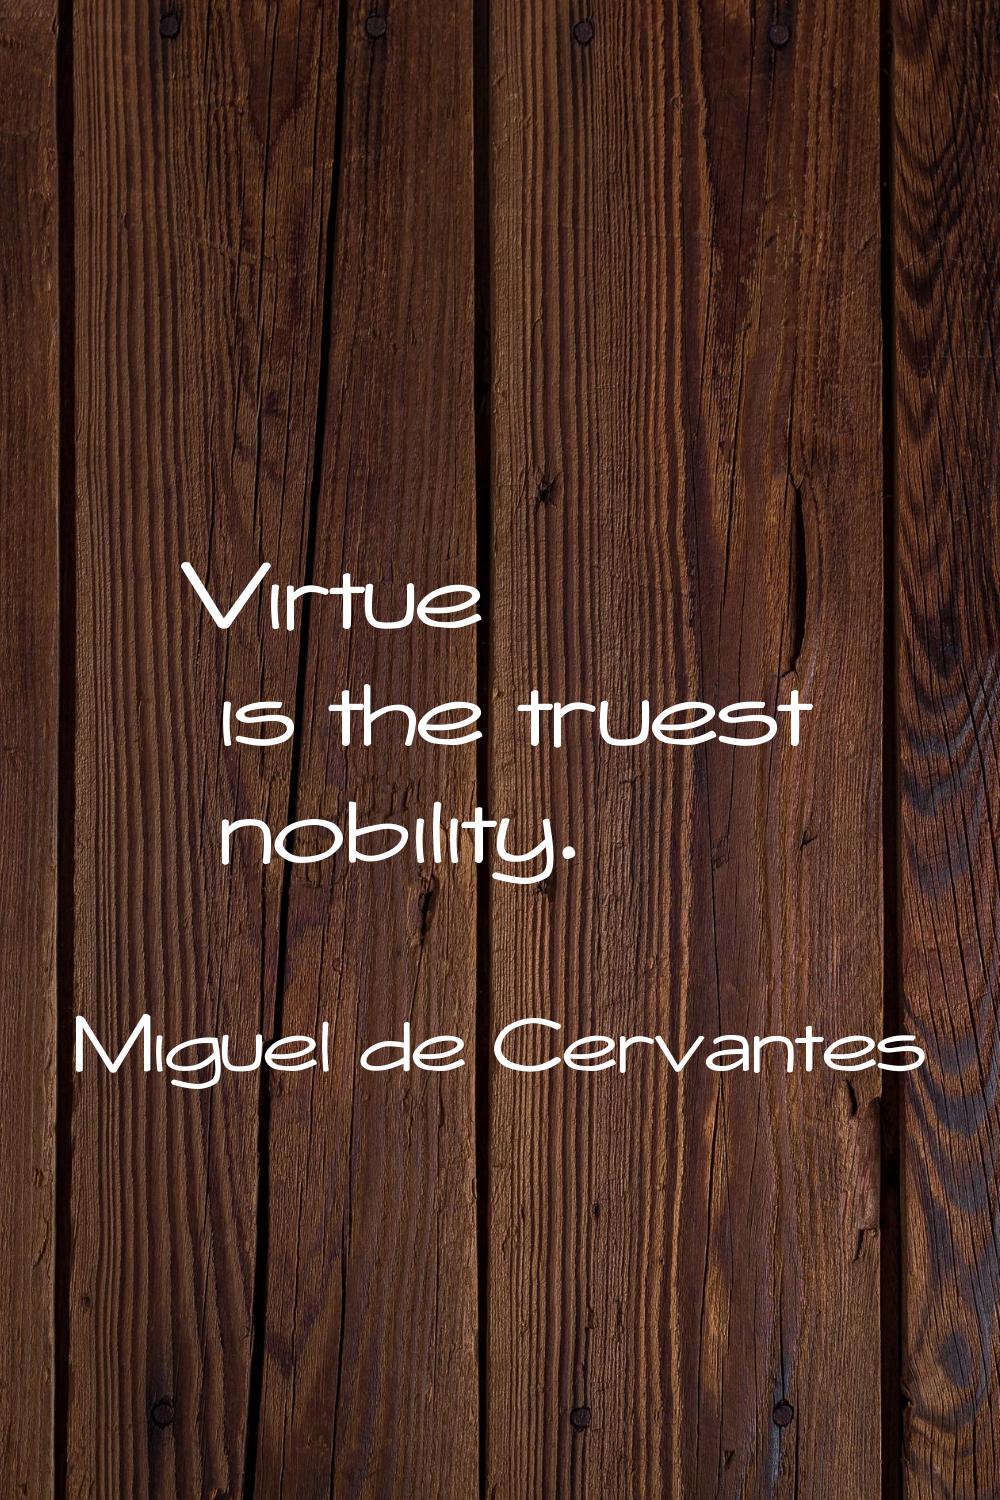 Virtue is the truest nobility.